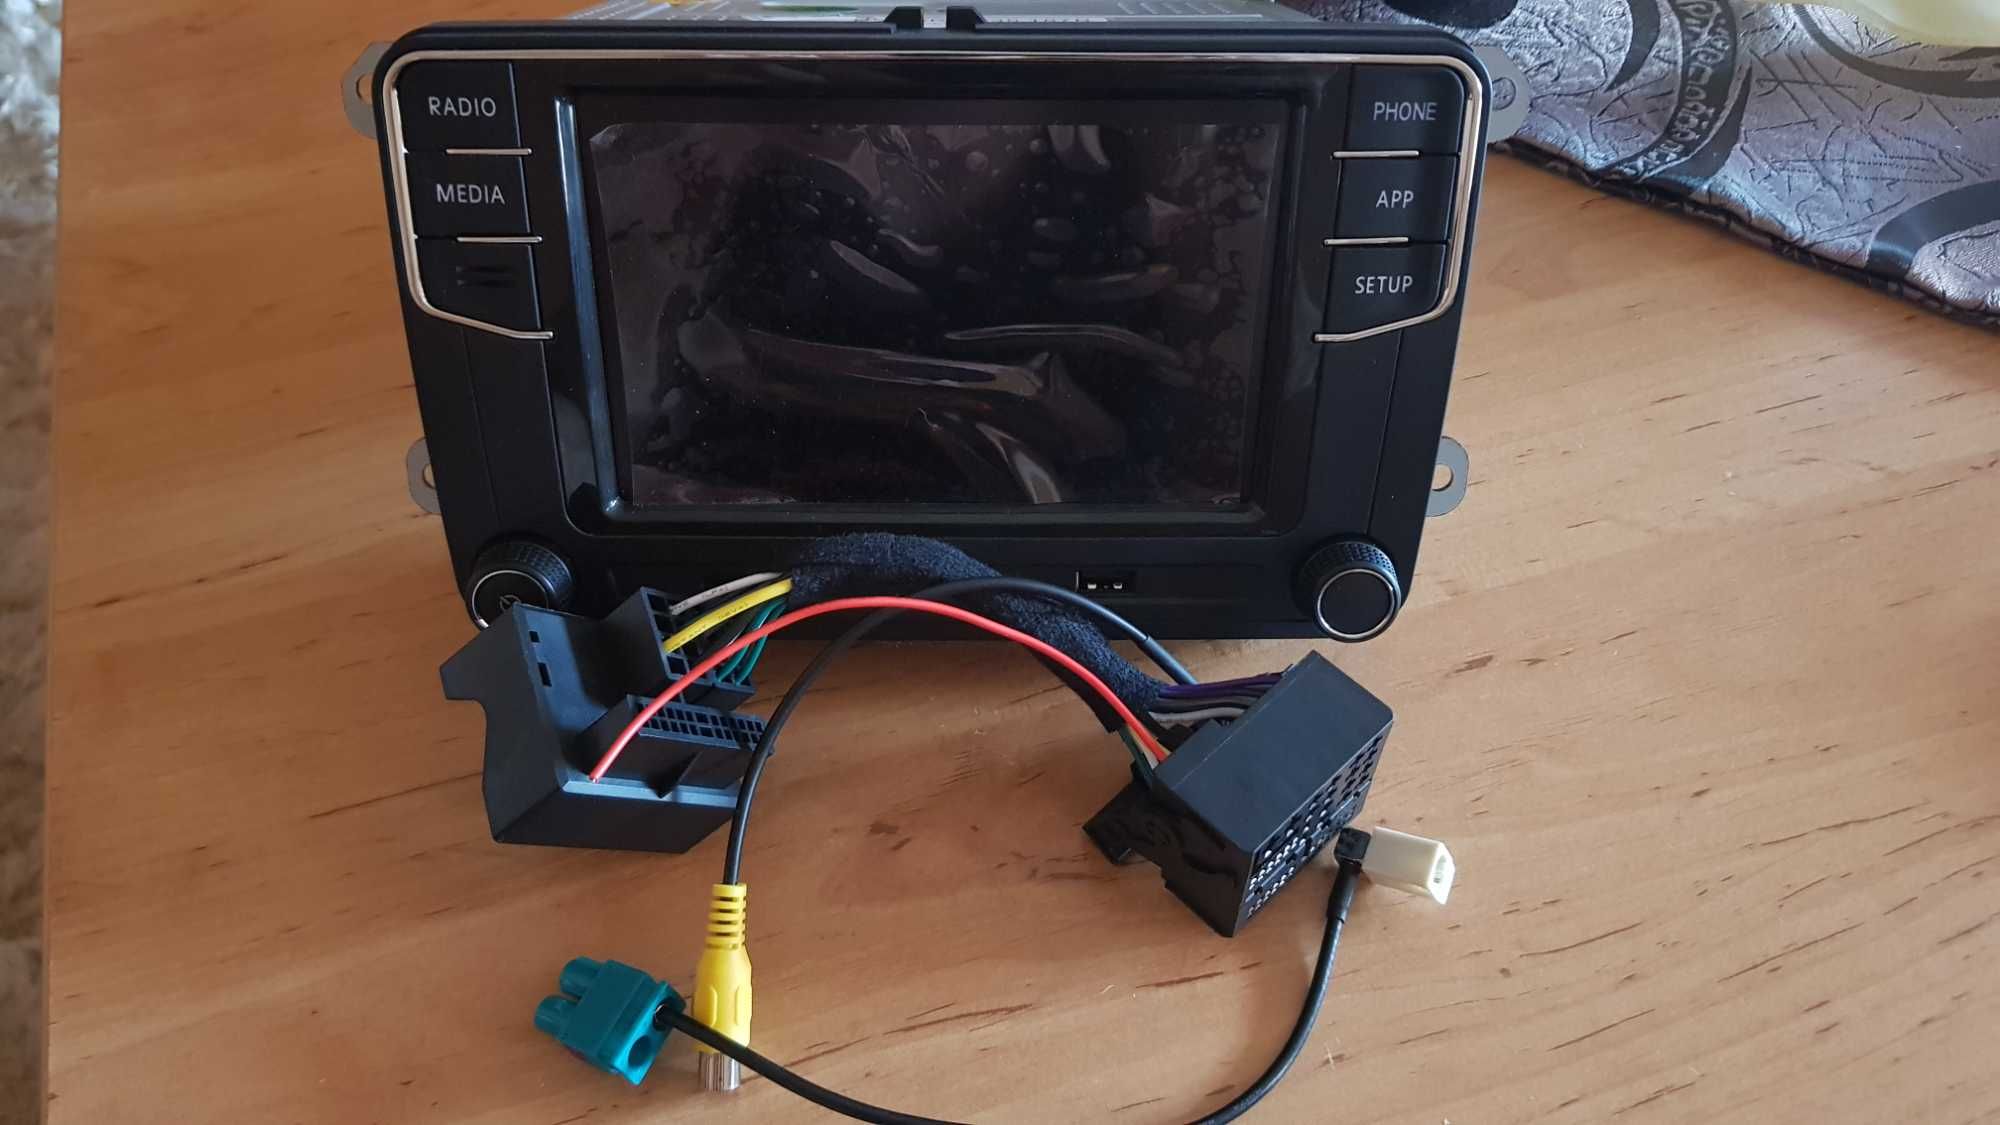 RCD 360 PRO vw md. RNS 510 - app connect,mirror-link , android auto